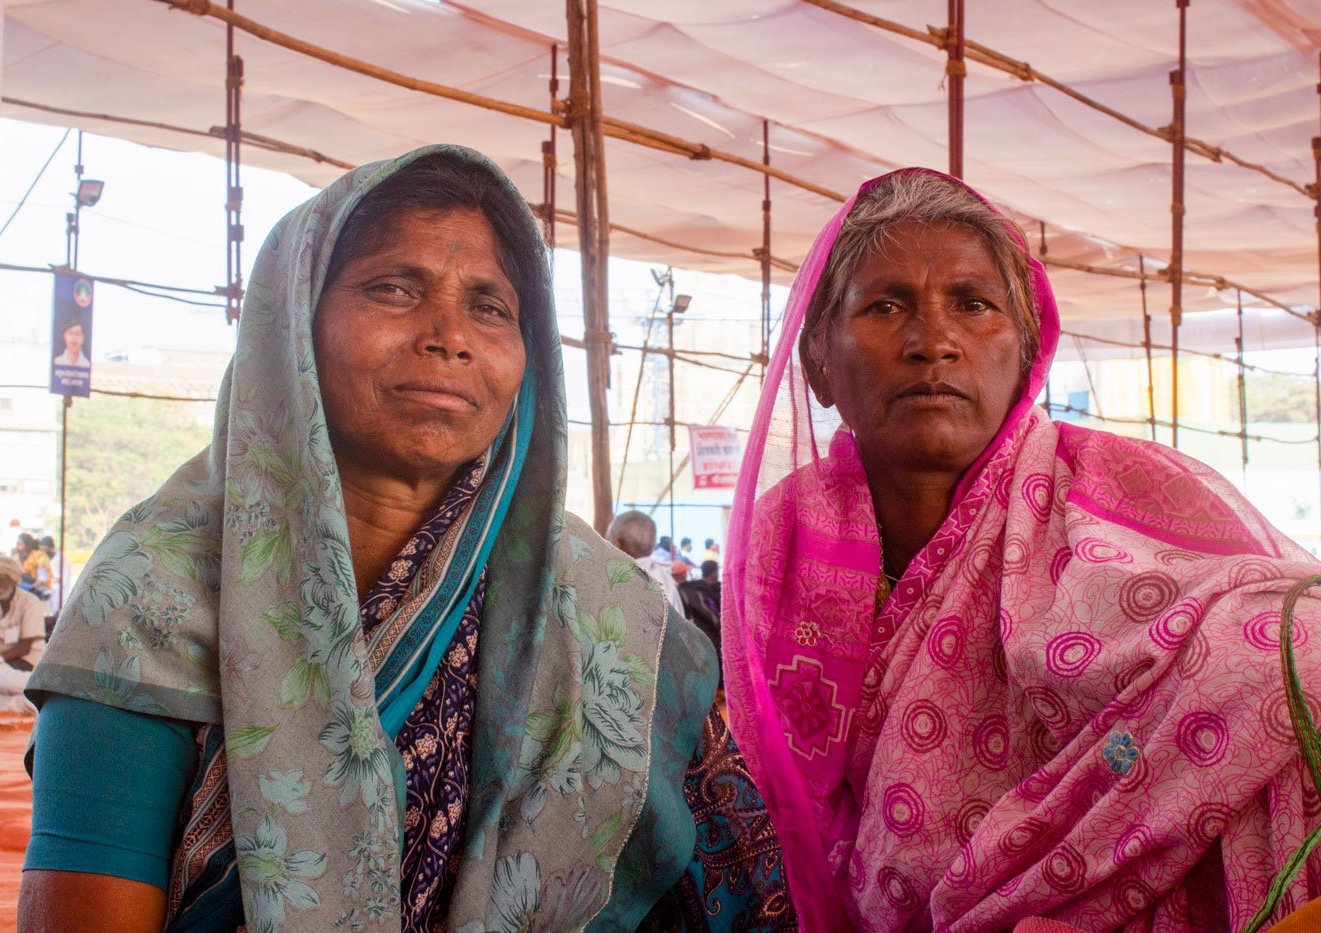 Arunabai and Shashikala – both widows from Adivasi communities, and farmers and farm labourers in Aurangabad district – came to Mumbai to protest against the new farm laws and demand their land titles